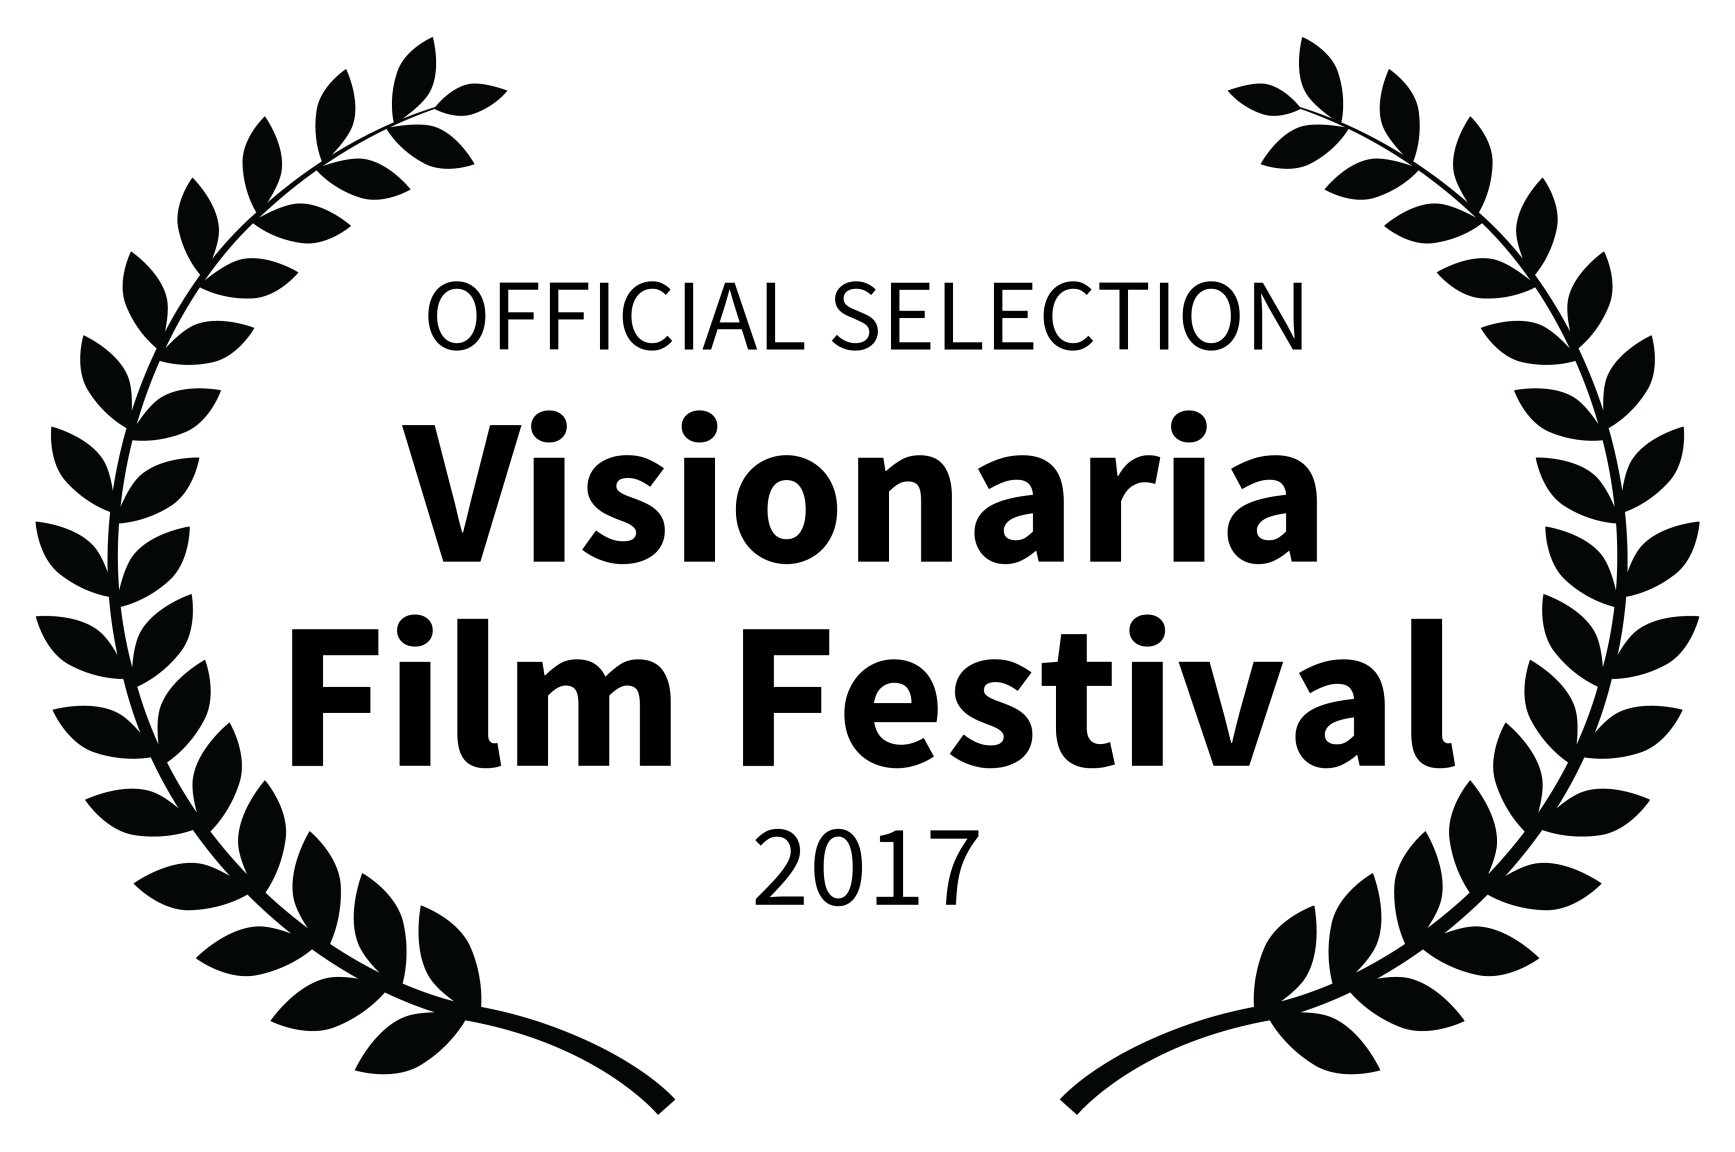 Laurel for Official Selection at Visionaria Film Festival awarded to 'Street Talk' in 2017